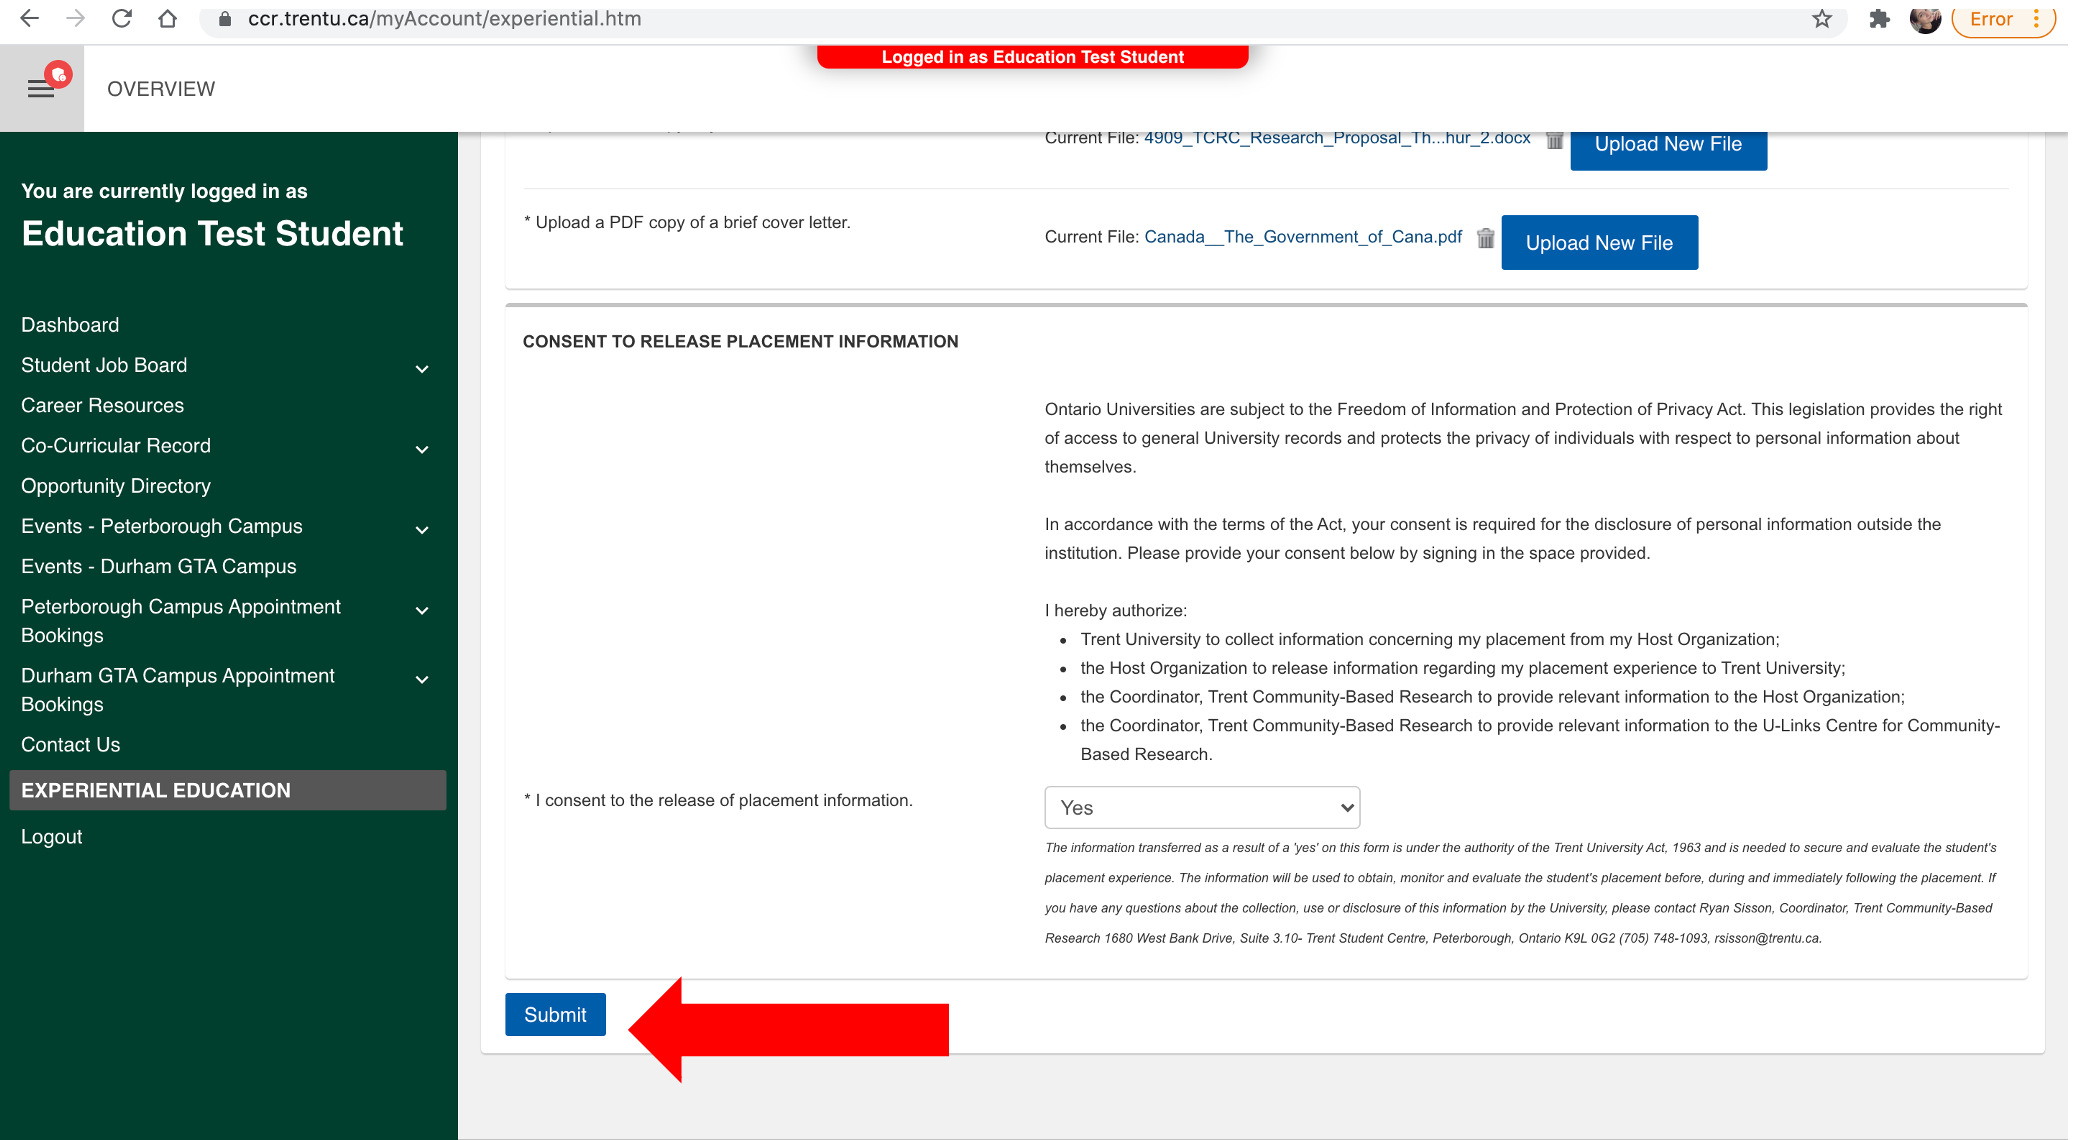 Screenshot of the end of the CBR Student Application with an arrow pointing to "Submit". 